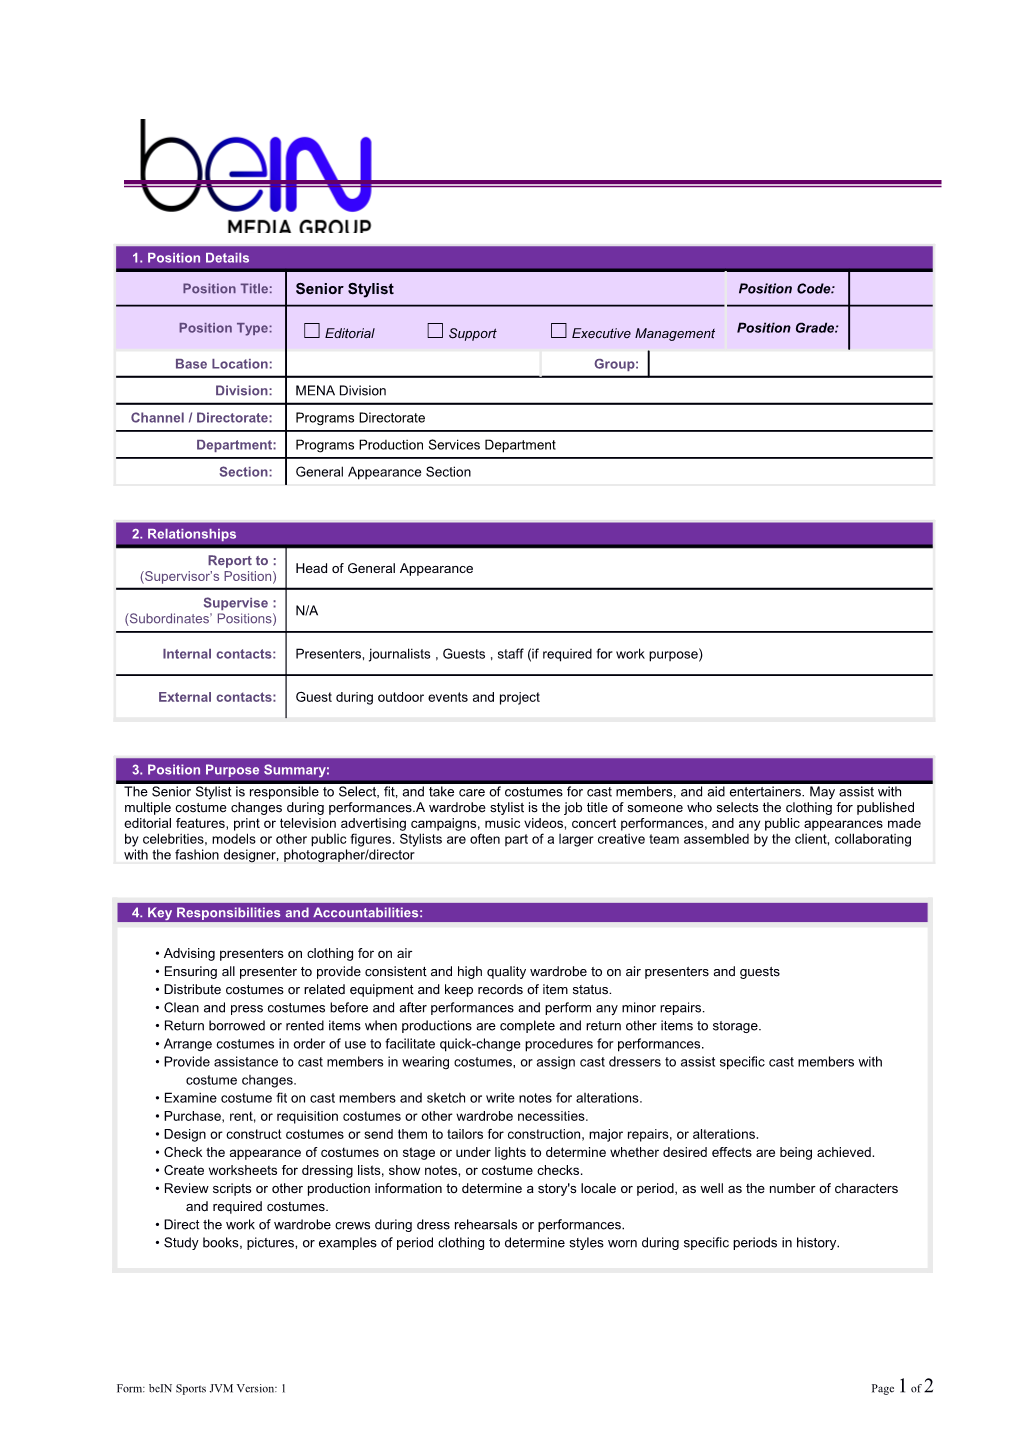 Form: Bein Sports JVM Version: 1Page 1 of 2